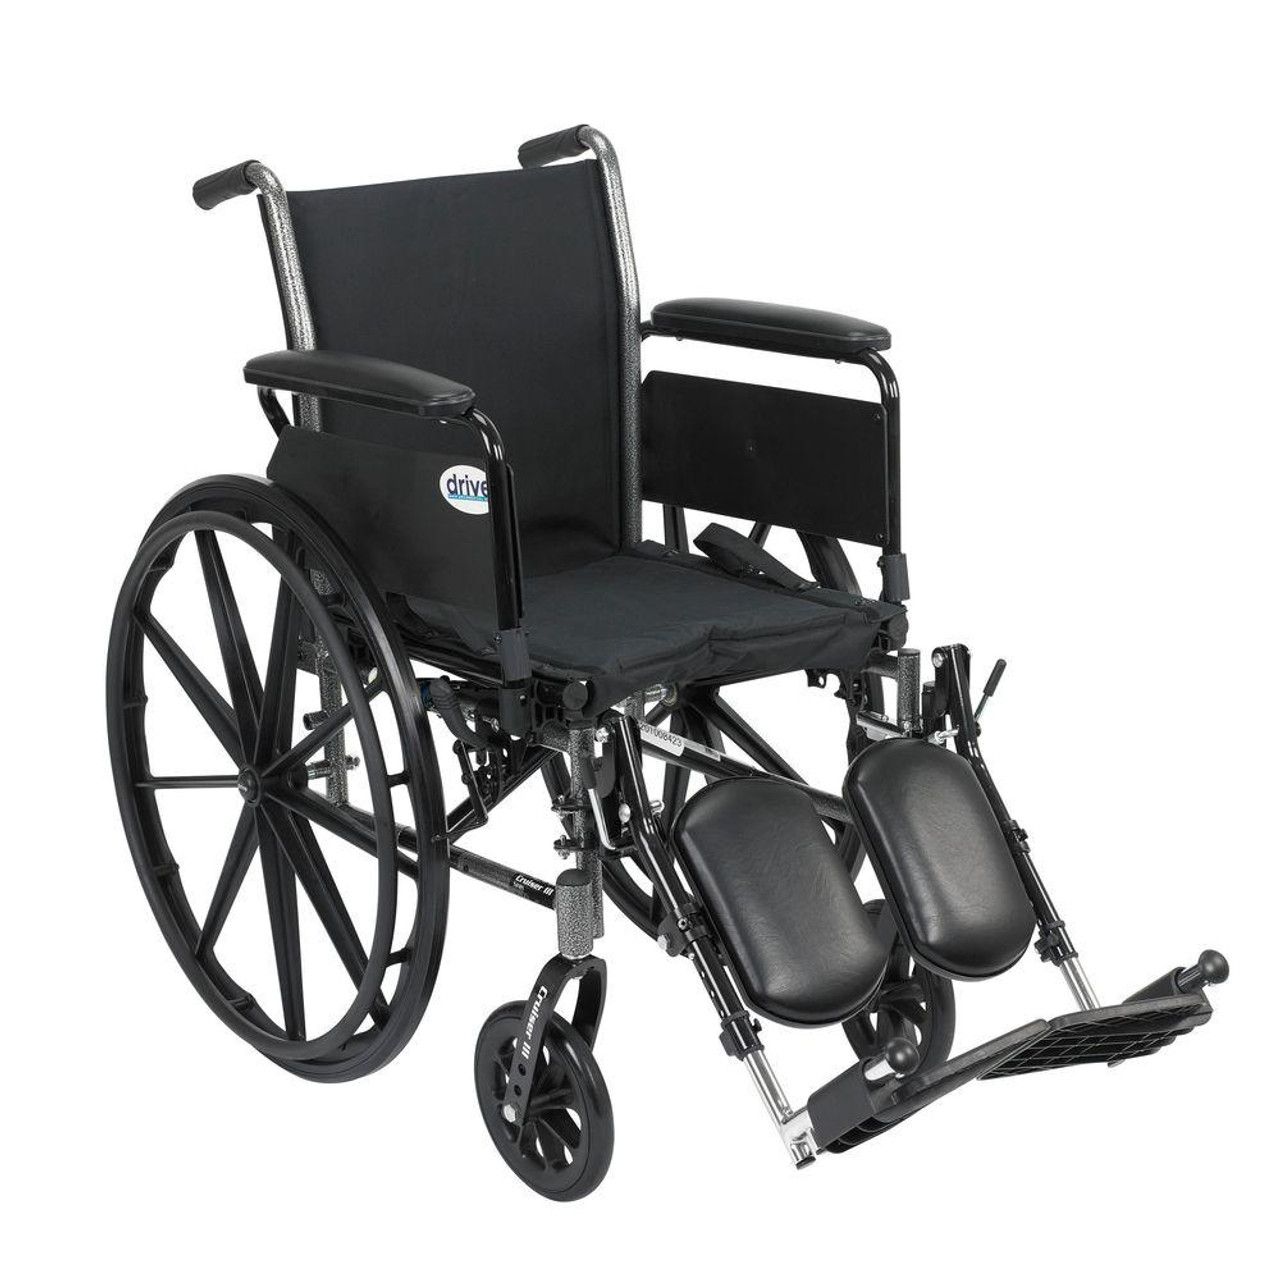 Drive K316DFA-ELR Cruiser III Light Weight Wheelchair with Flip Back Removable Arms, Full Arms, Elevating Leg Rests, 16" Seat (K316DFA-ELR)